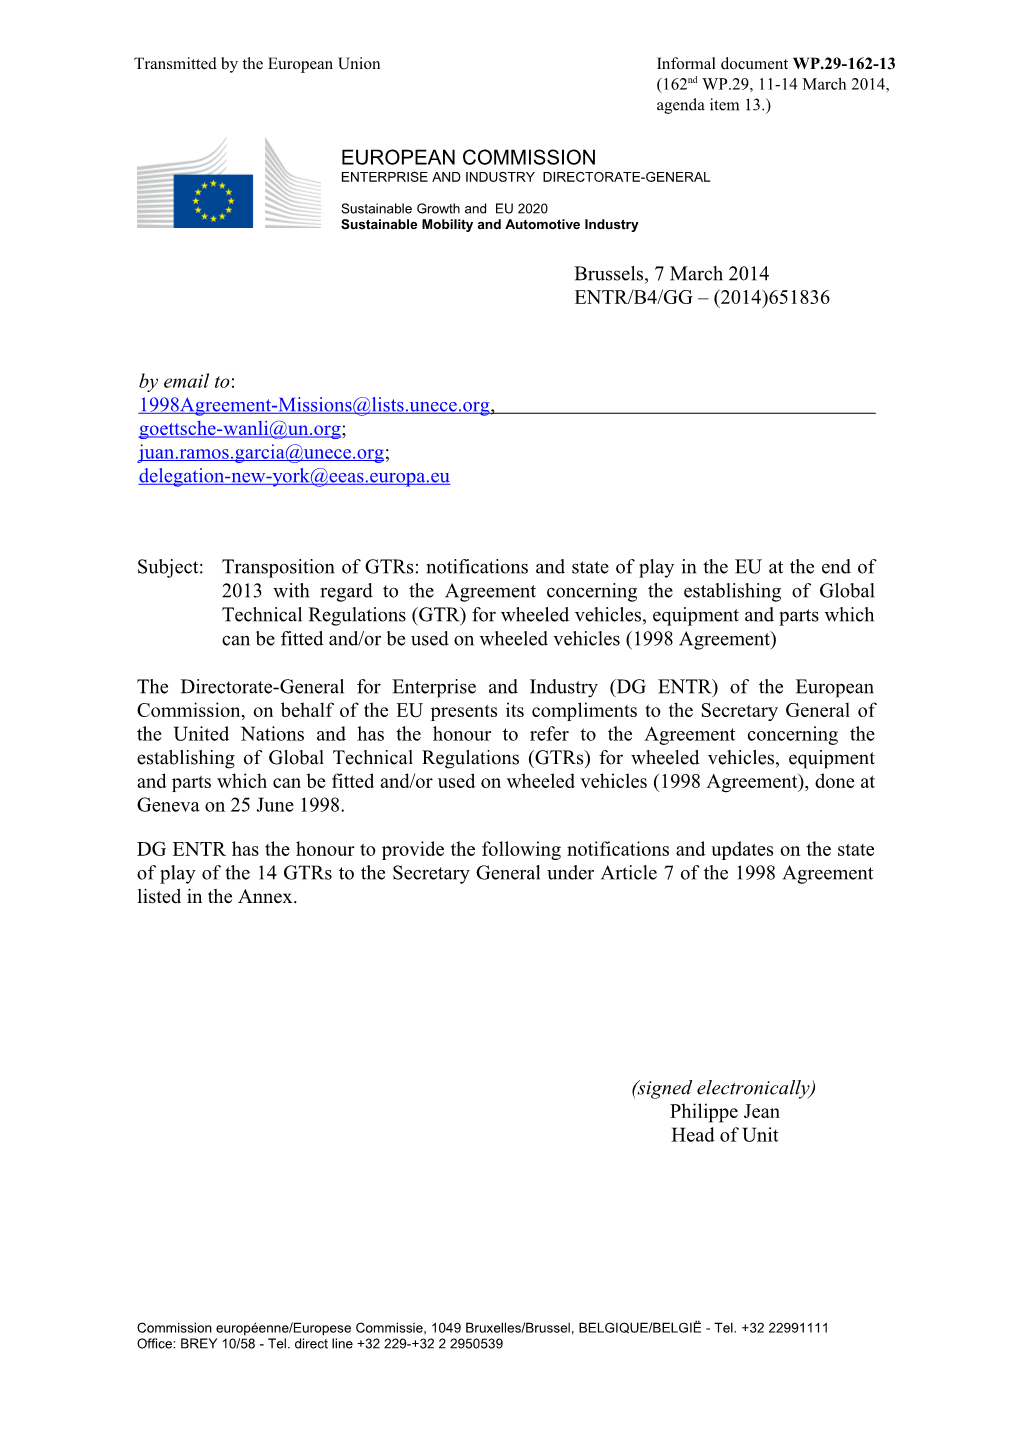 Subject: Transposition of Gtrs: Notifications and State of Play in the EU at the End Of